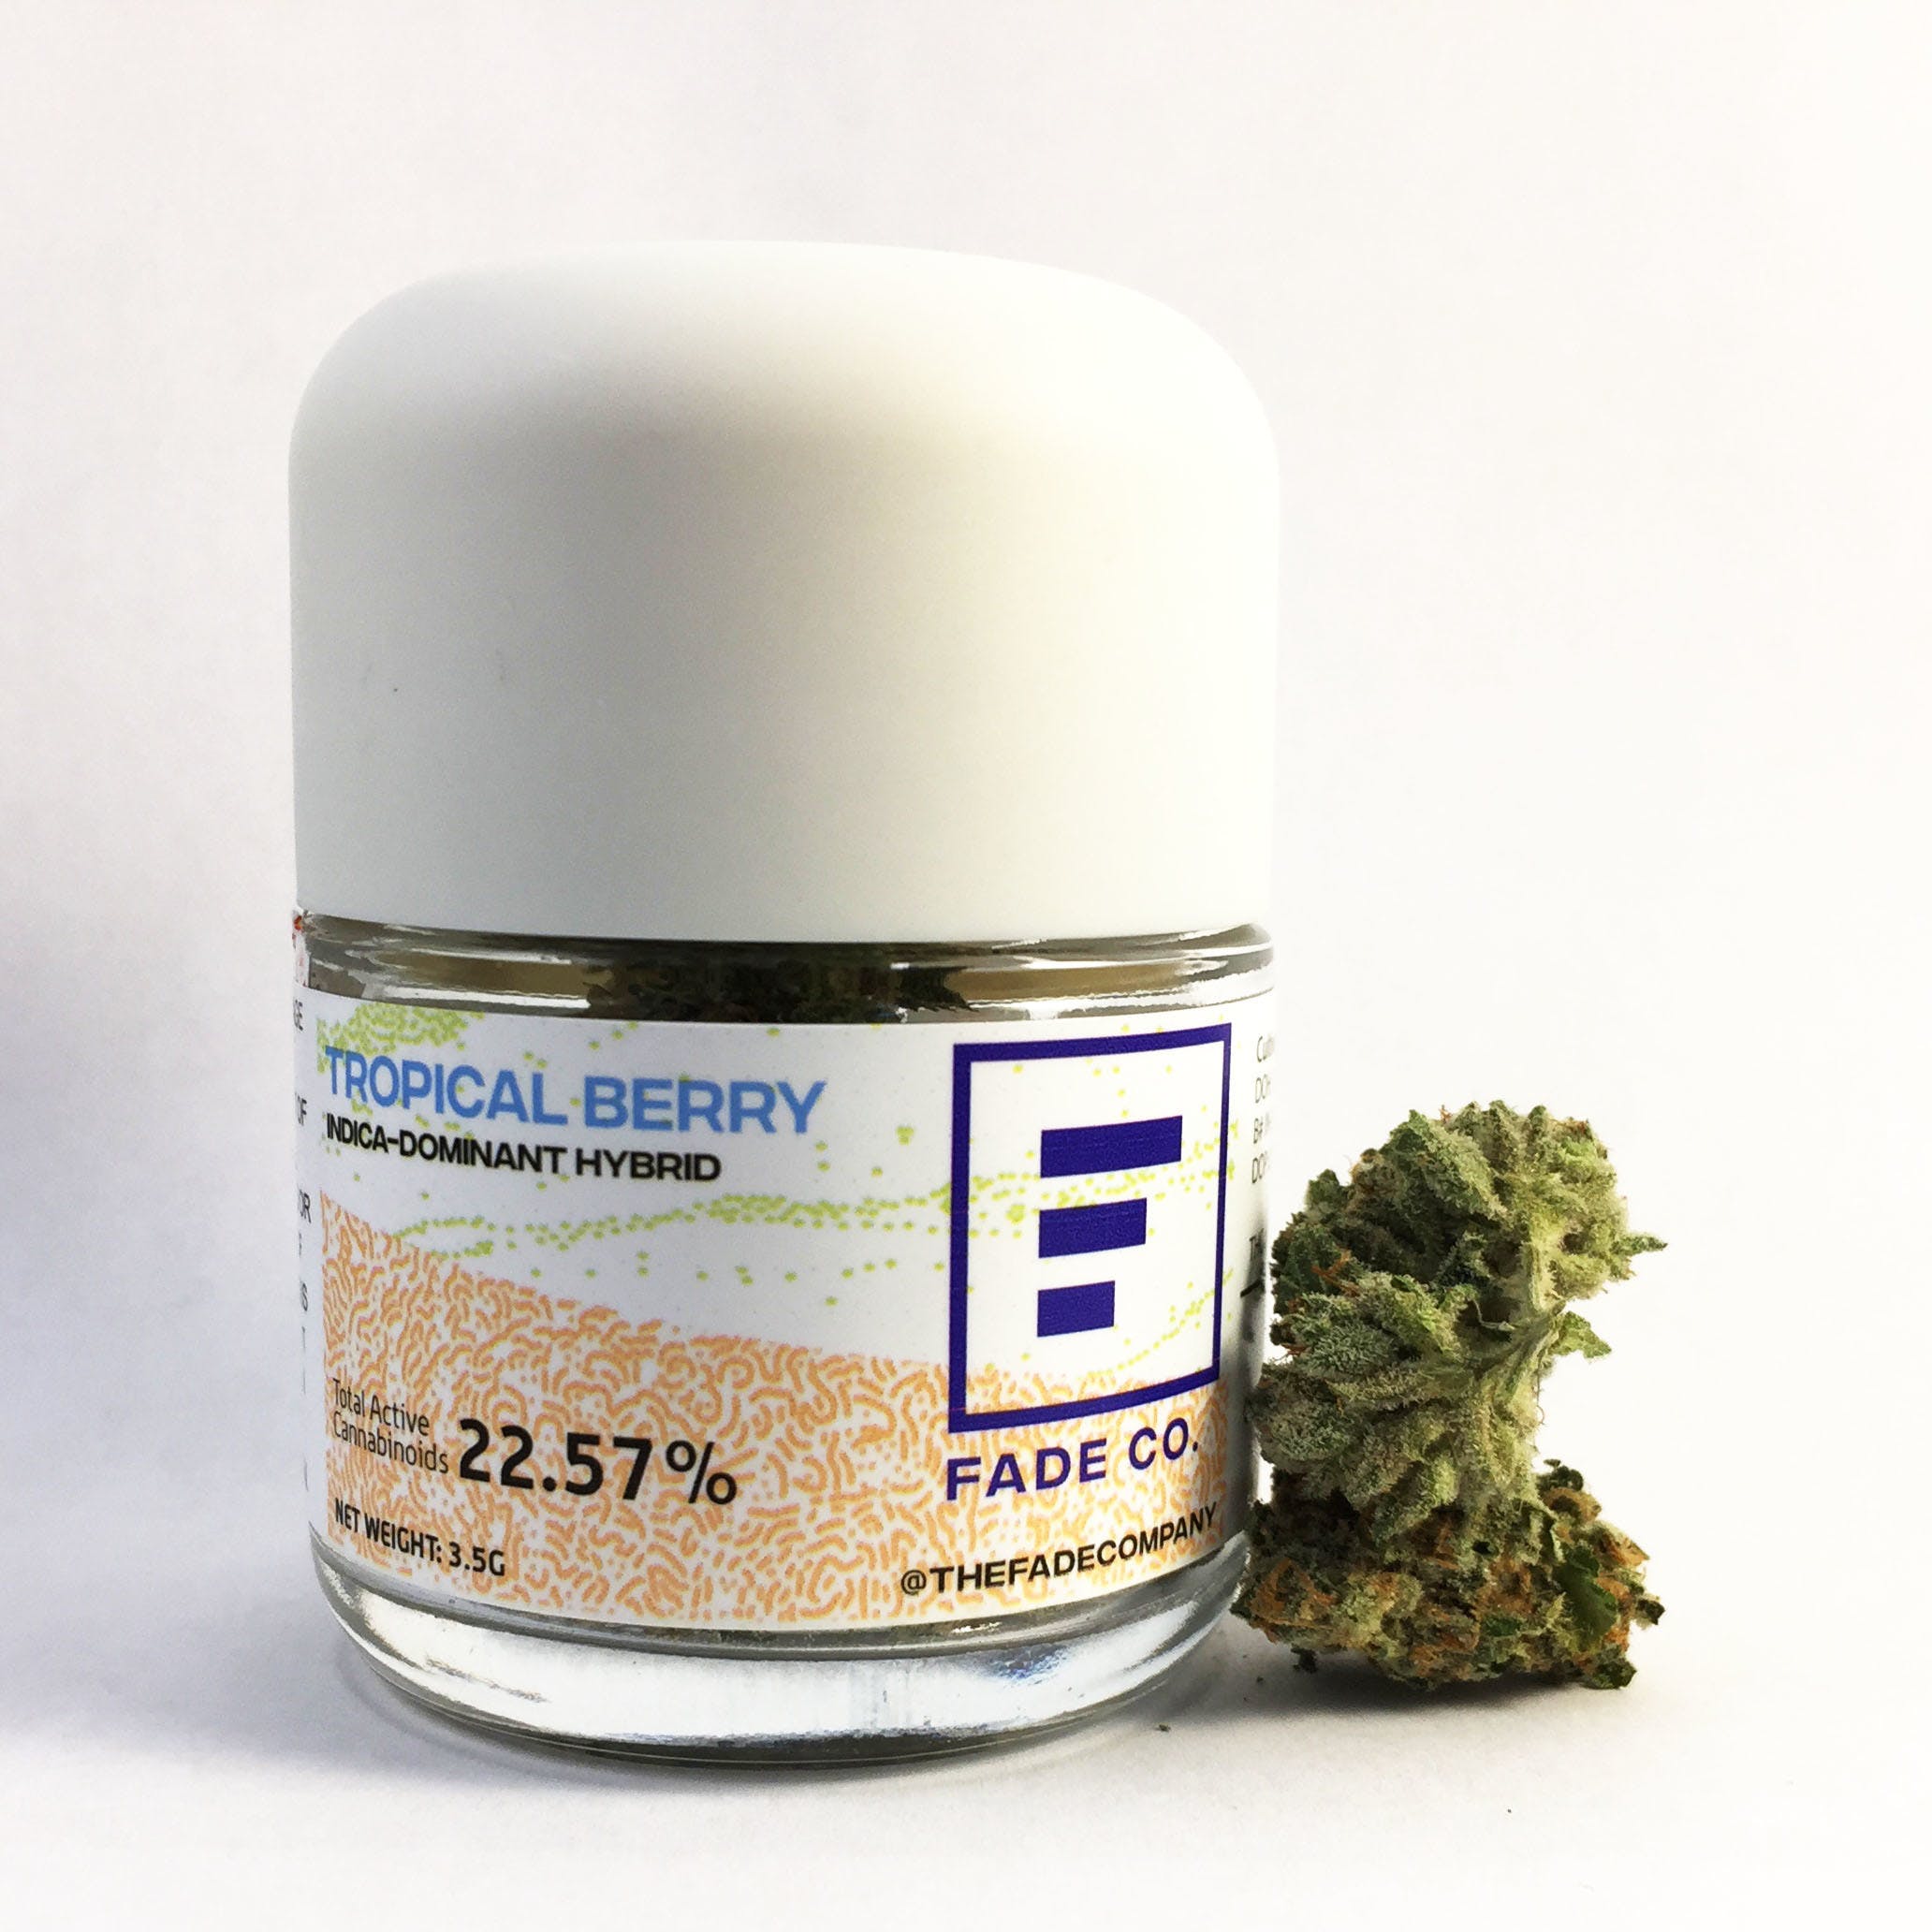 hybrid-tropical-berry-by-fade-co